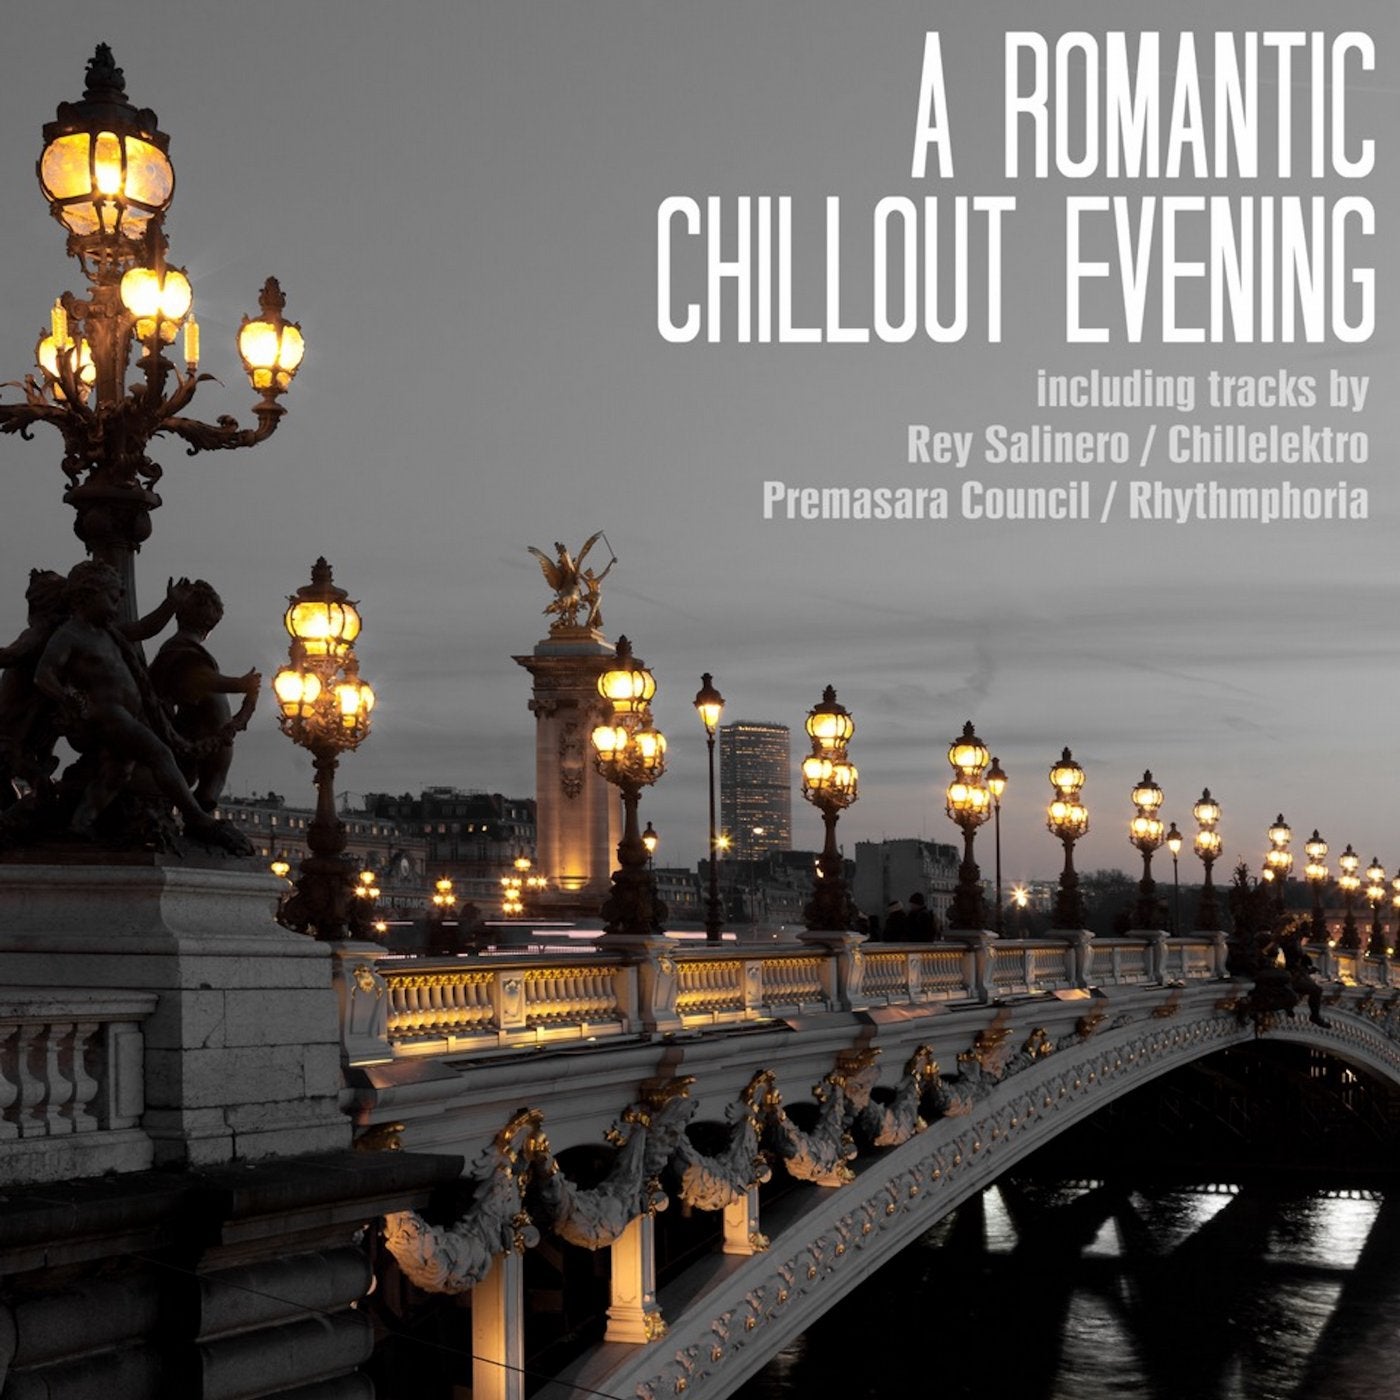 A Romantic Chillout Evening